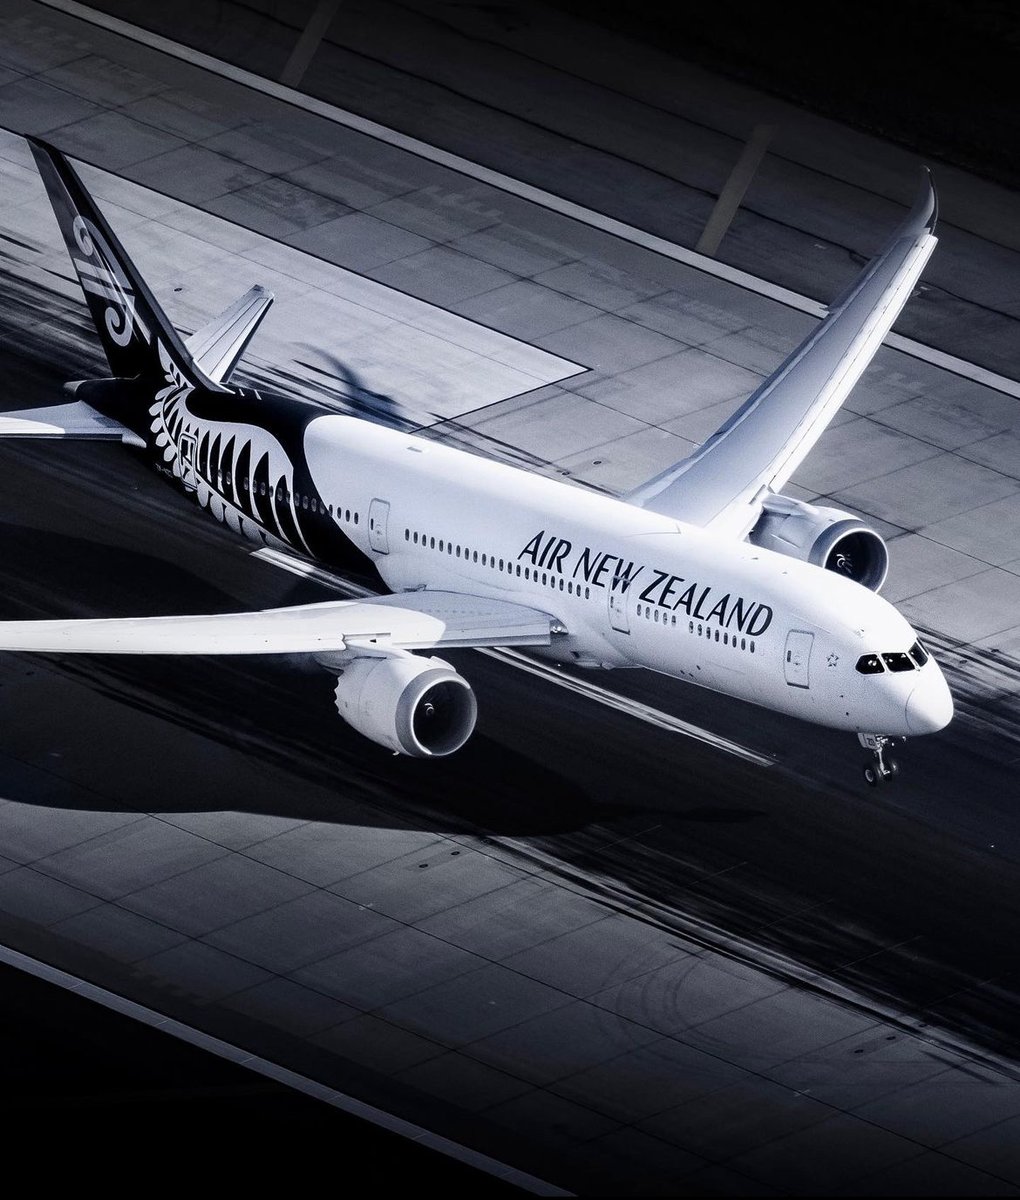 This month marks 40 amazing years of Air New Zealand providing non-stop journeys between Los Angeles and Auckland. Happy Anniversary @FlyAirNZ and thank you for connecting LAX passengers to New Zealand! 📸: @aviationdylan